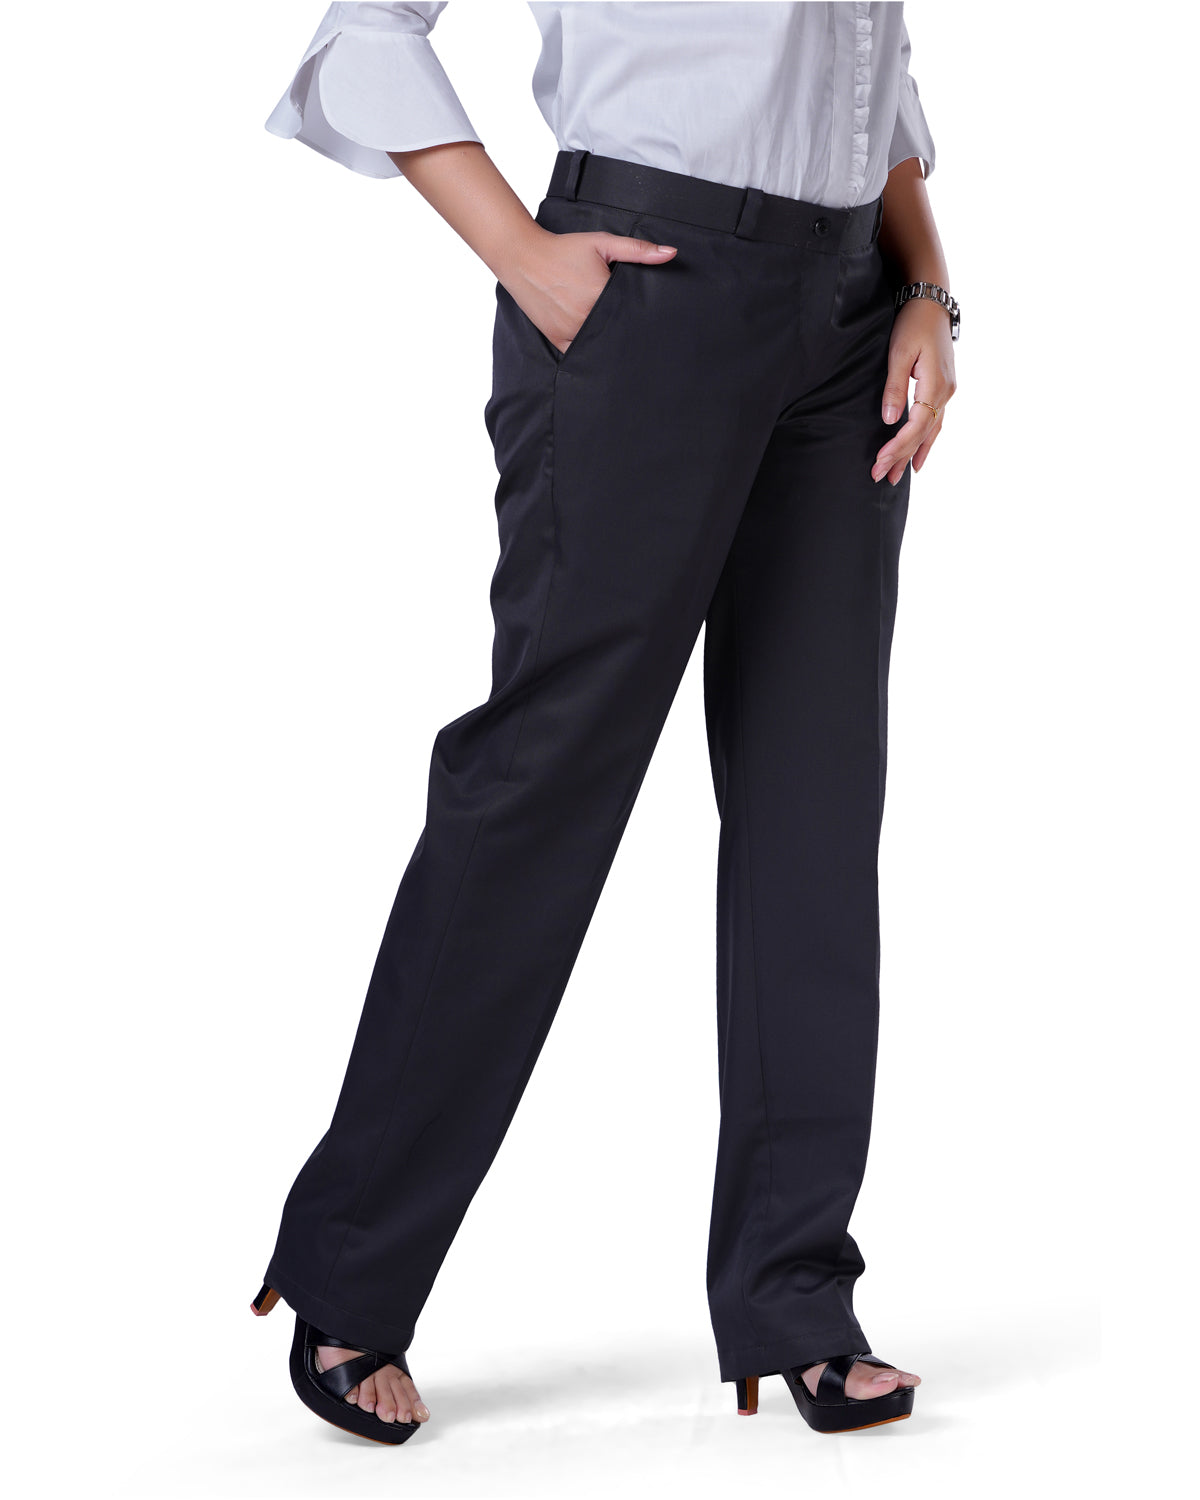 Charcoal trousers